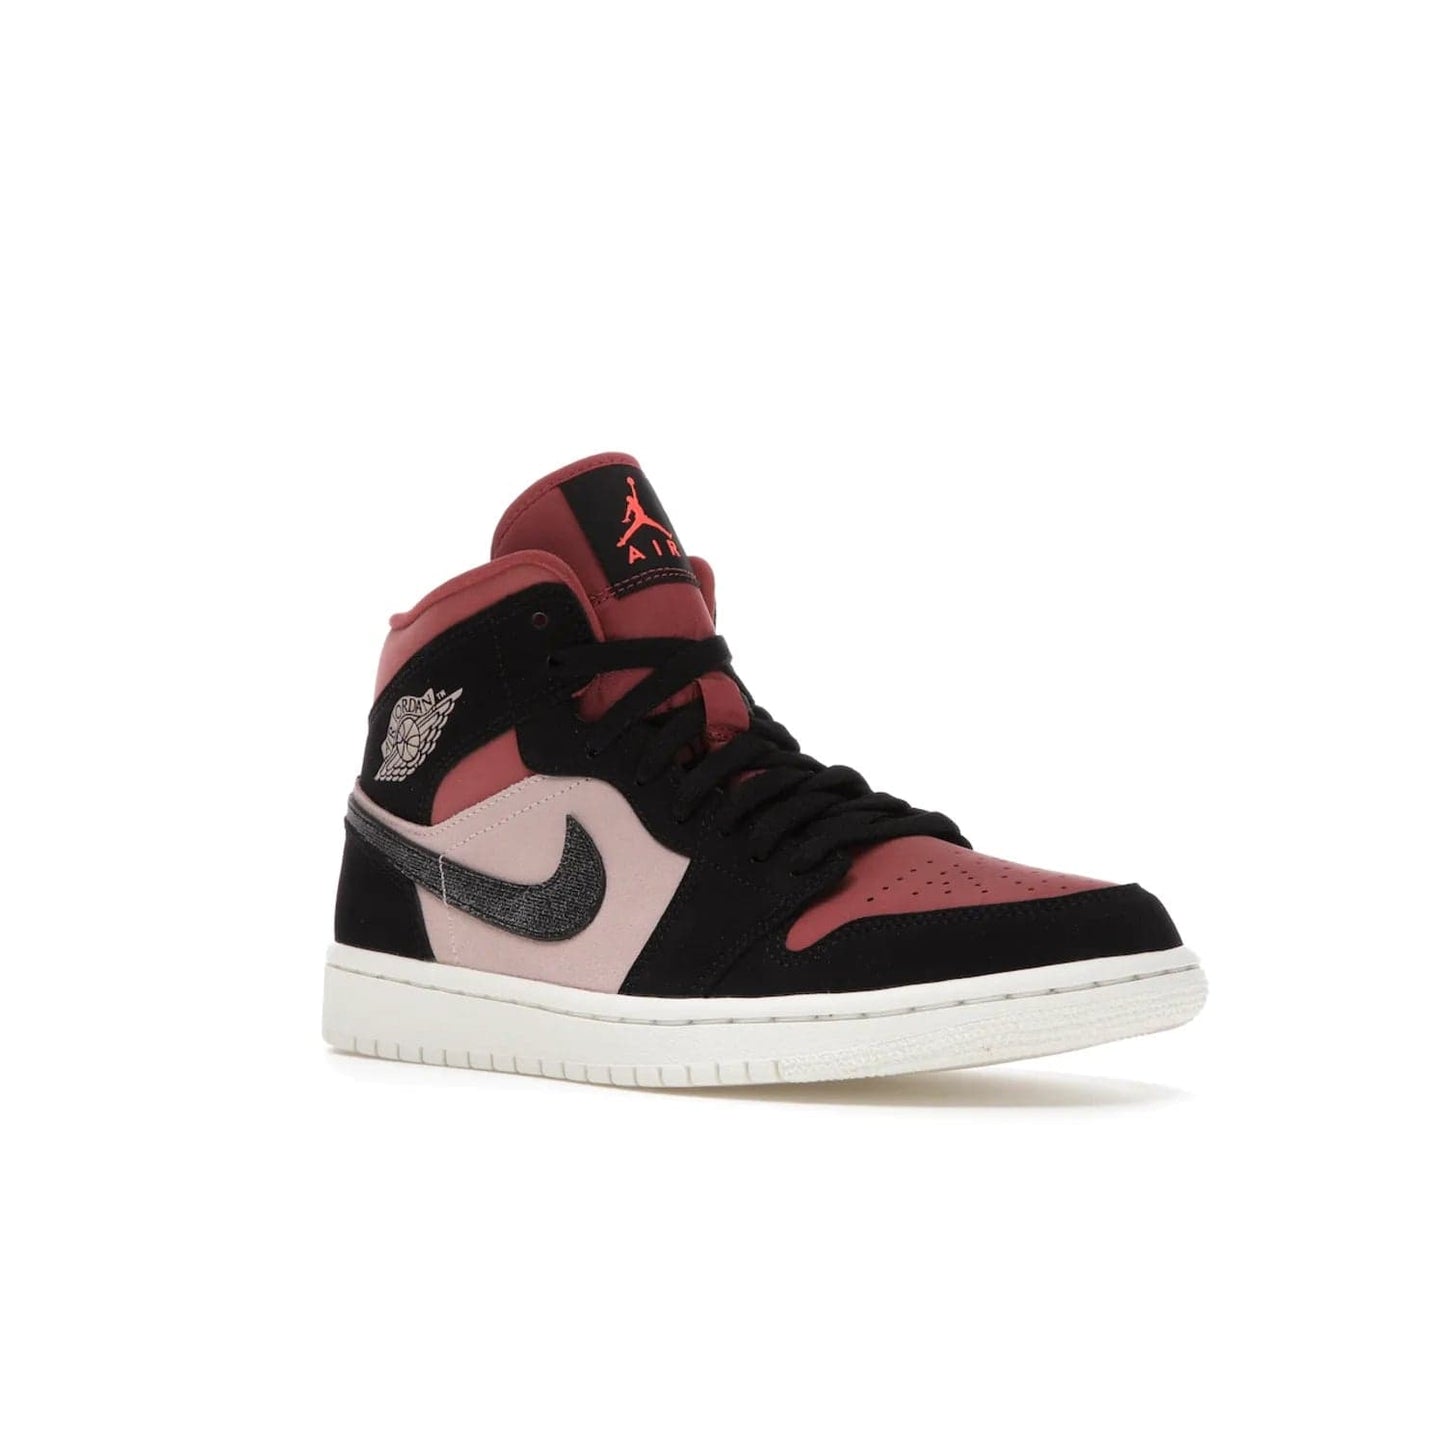 Jordan 1 Mid Canyon Rust (Women's) - Image 5 - Only at www.BallersClubKickz.com - The Air Jordan 1 Mid Canyon Rust for Women (W) is a stylish mid-top sneaker with distressed Nike swooshes and a white rubber cupsole. Featuring a blend of particle beige, canyon rust, sail and black, this versatile design will provide you with amazing comfort and style. Out now, 1st March 2021!